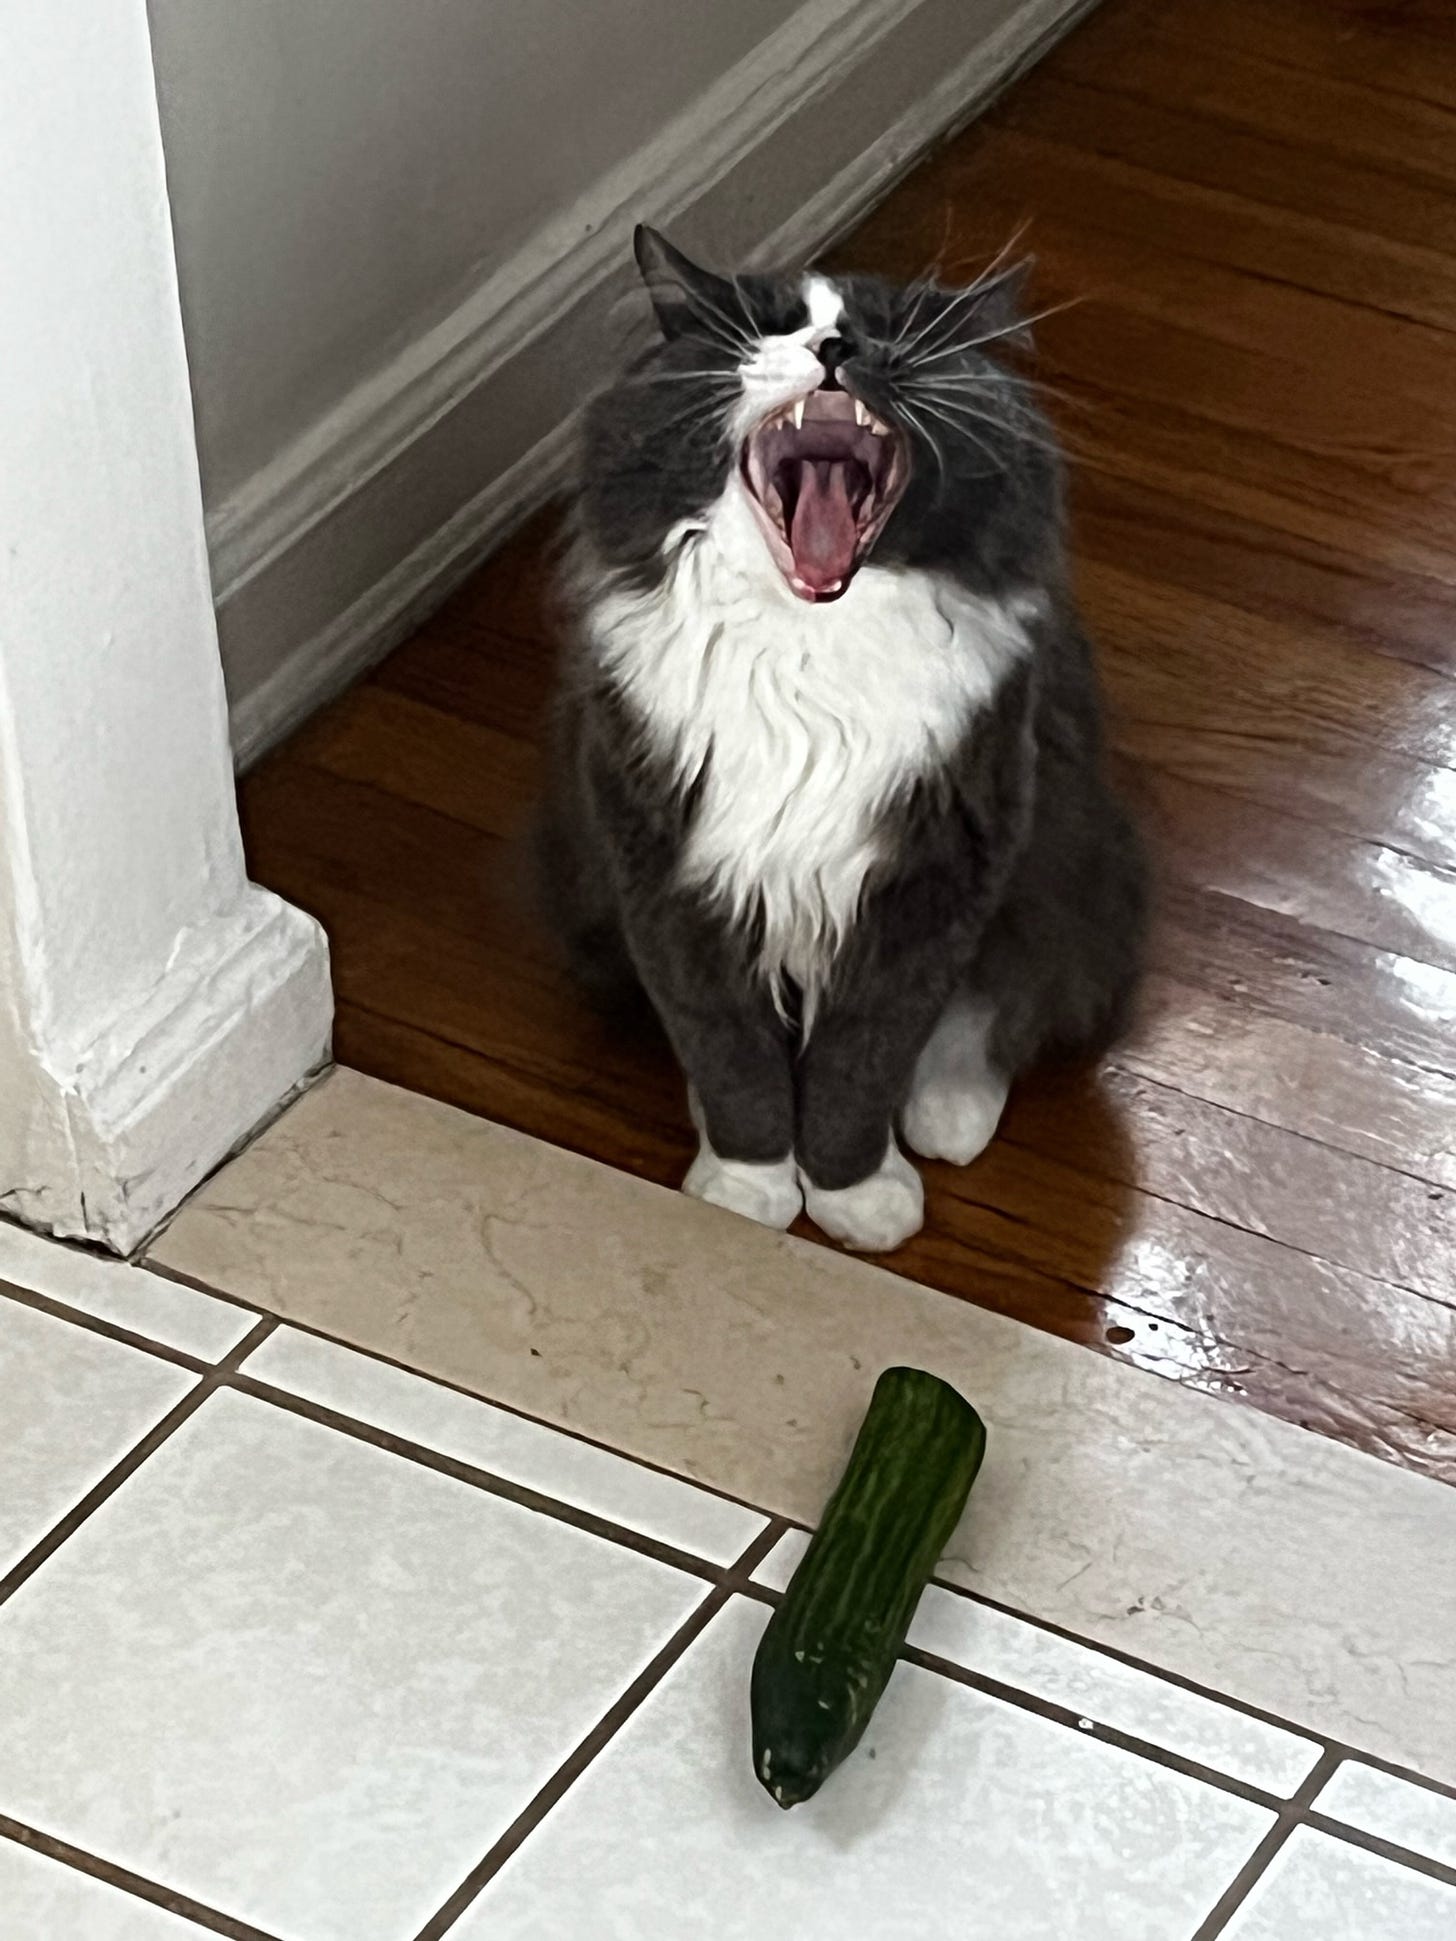 Gustav the cat opens his mouth very wide, sitting in front of a cucumber